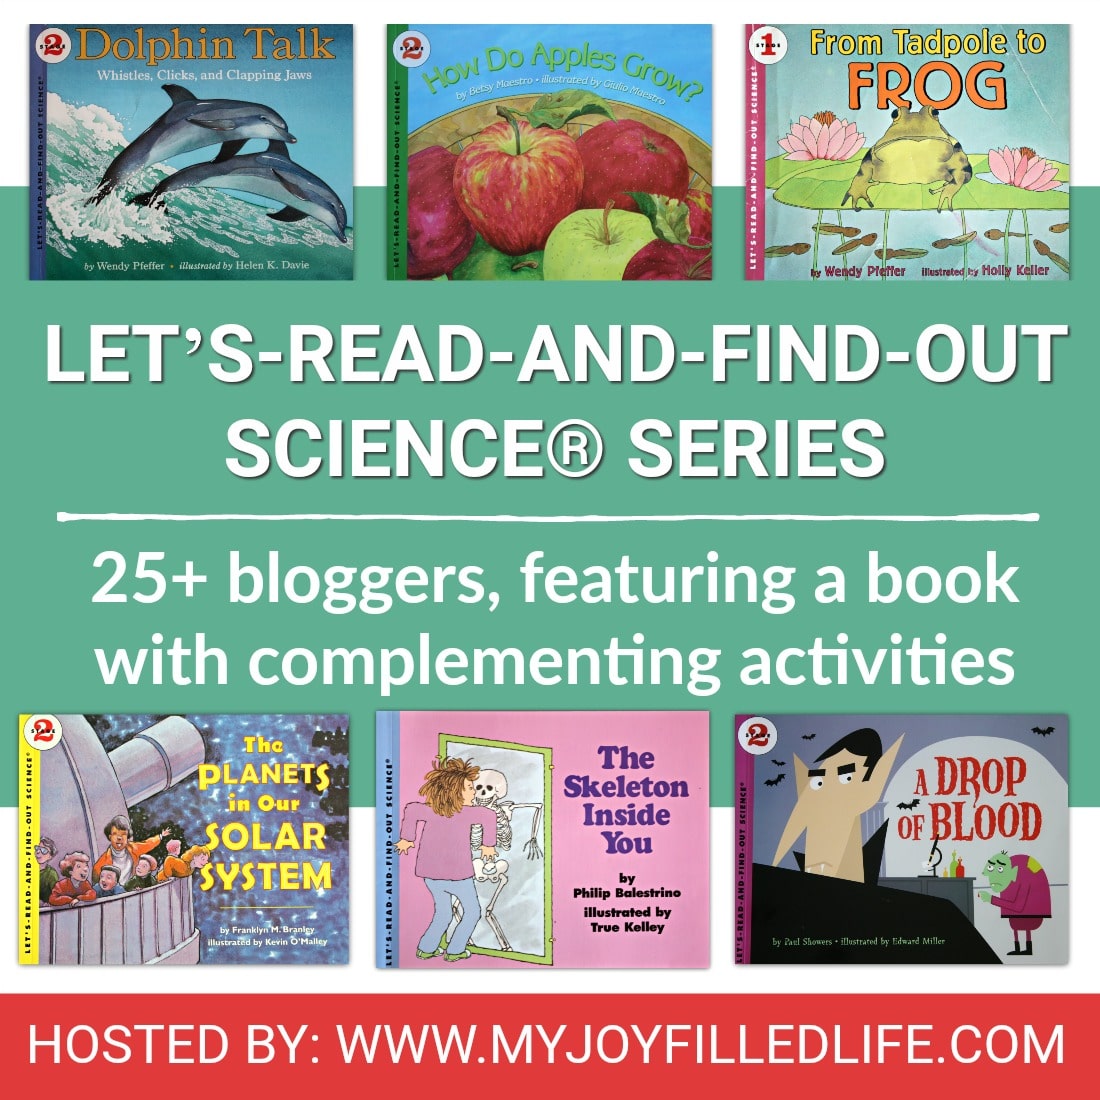 LET’S-READ-AND-FIND-OUT SCIENCE® BOOK SERIES ACTIVITIES